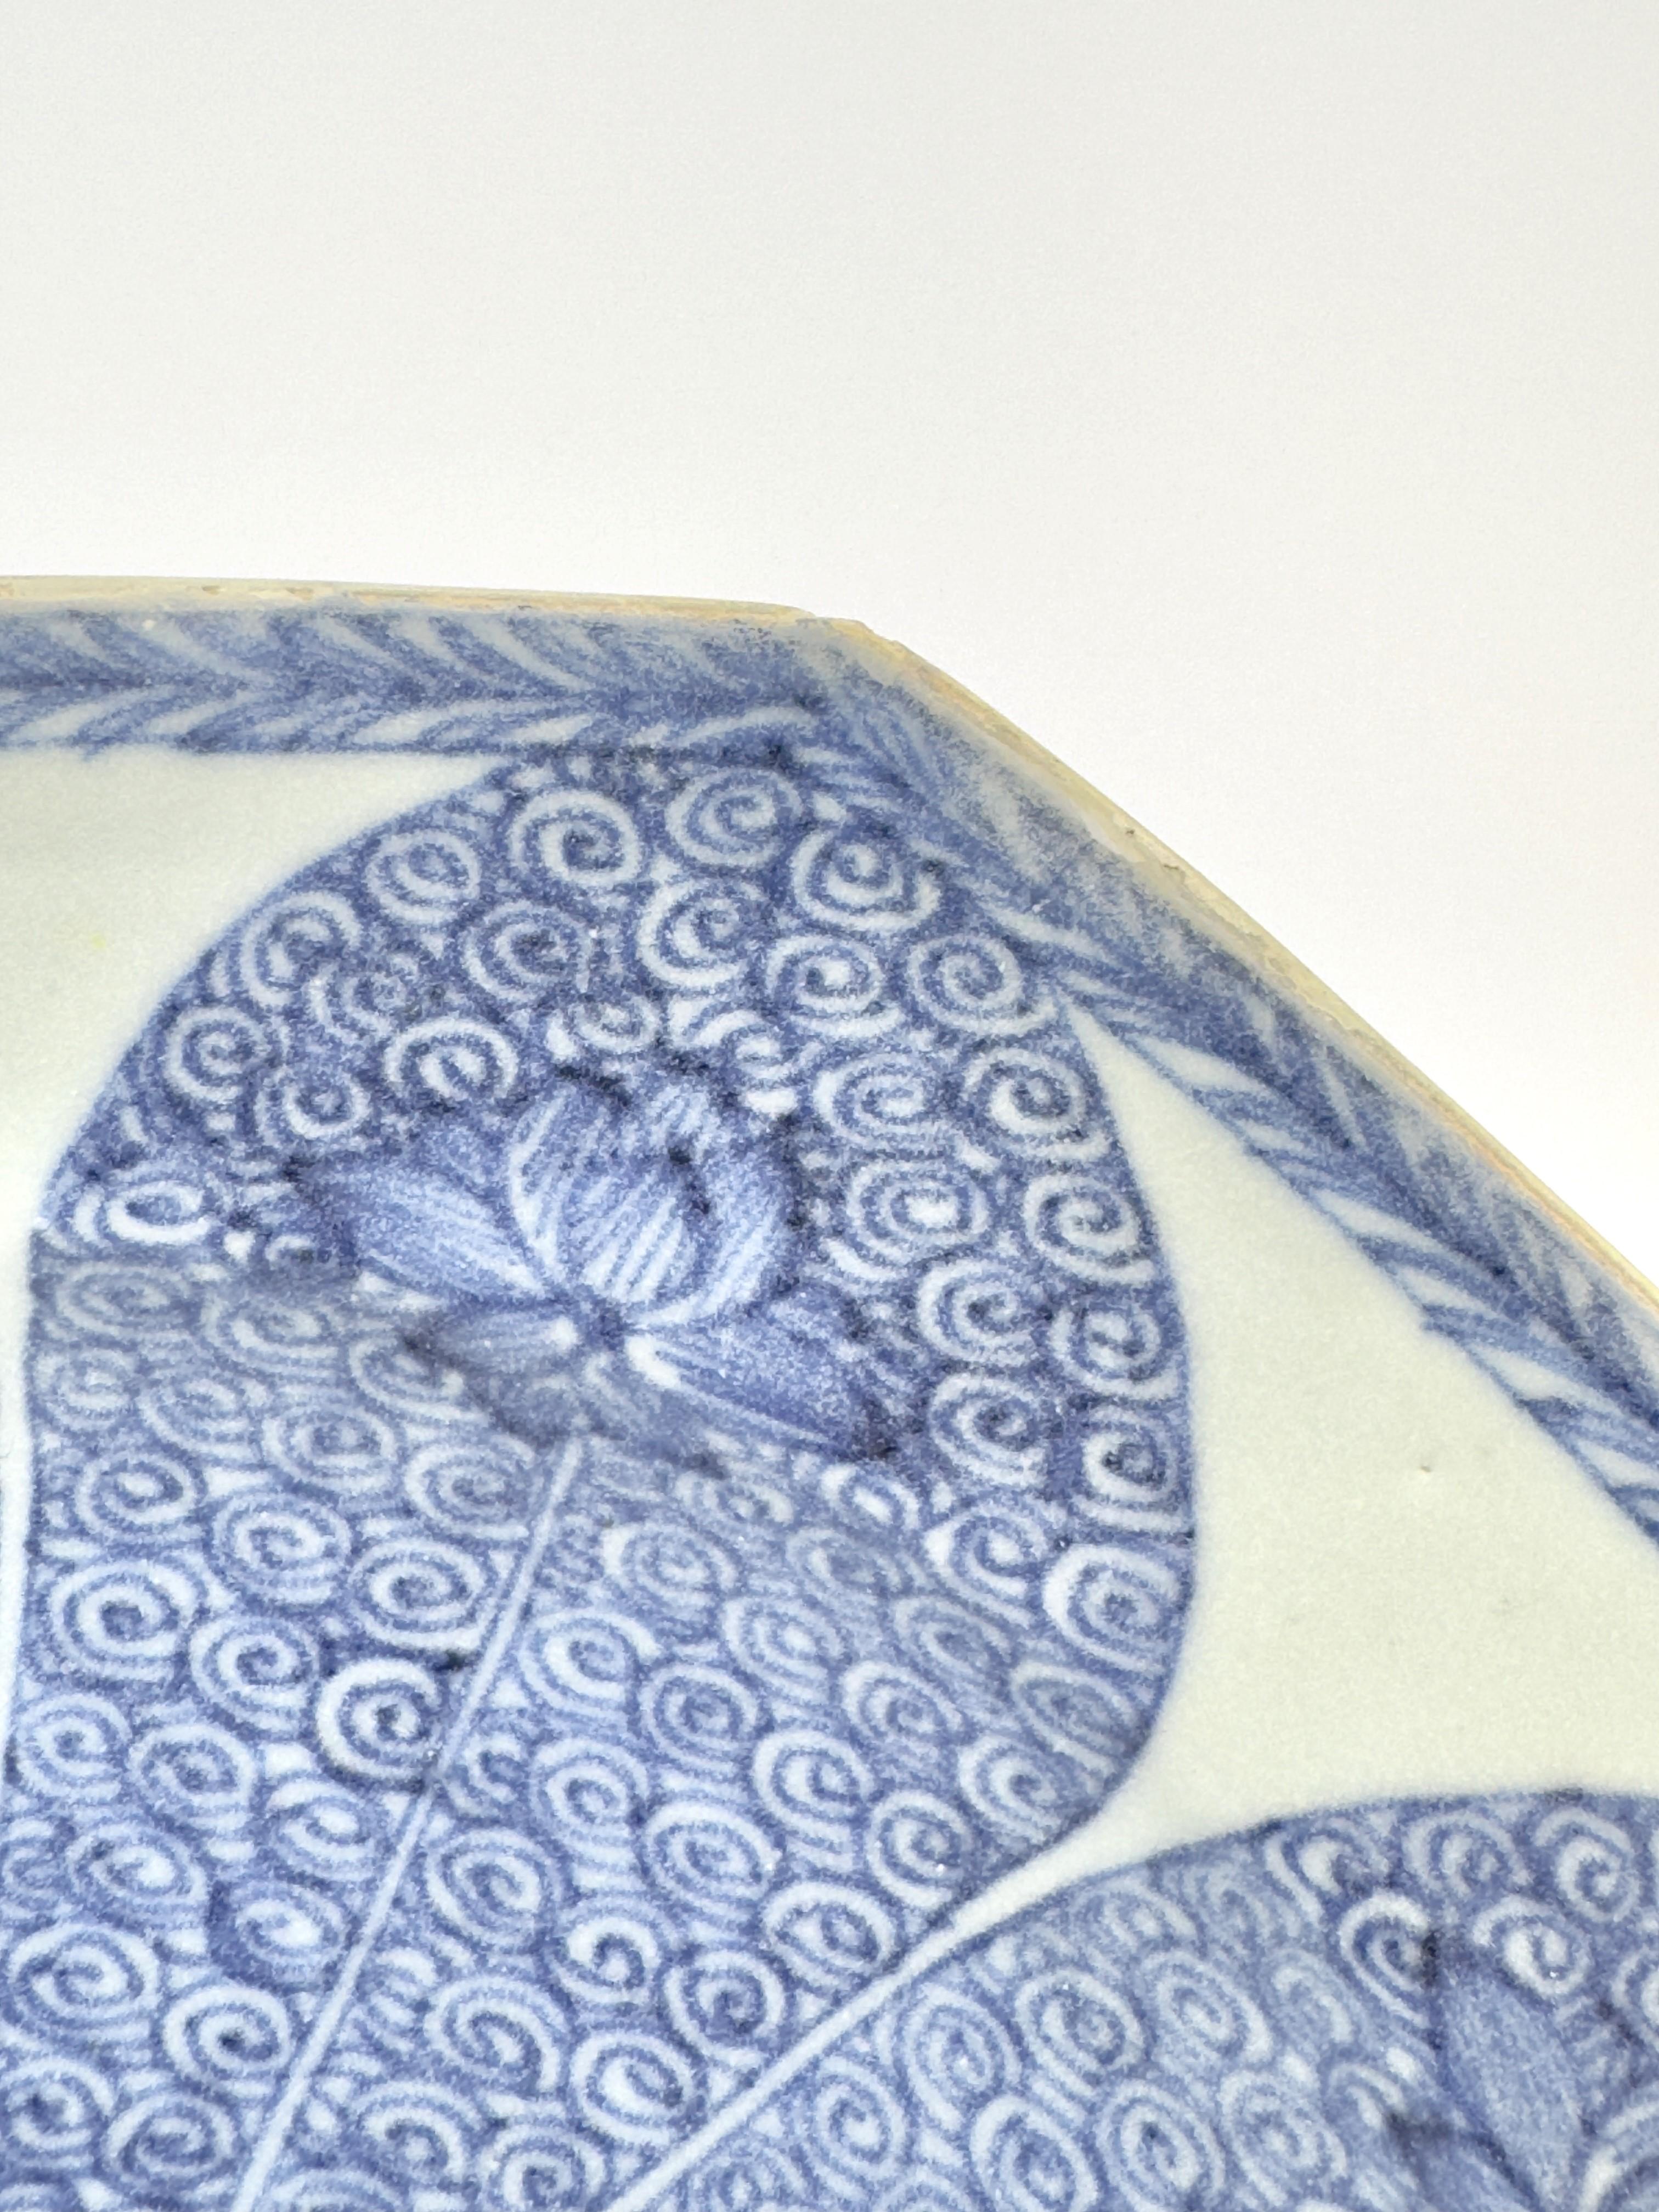 Early 18th Century 'Lotus' Pattern Blue and White Dish c. 1725, Qing Dynasty, Yongzheng Era For Sale